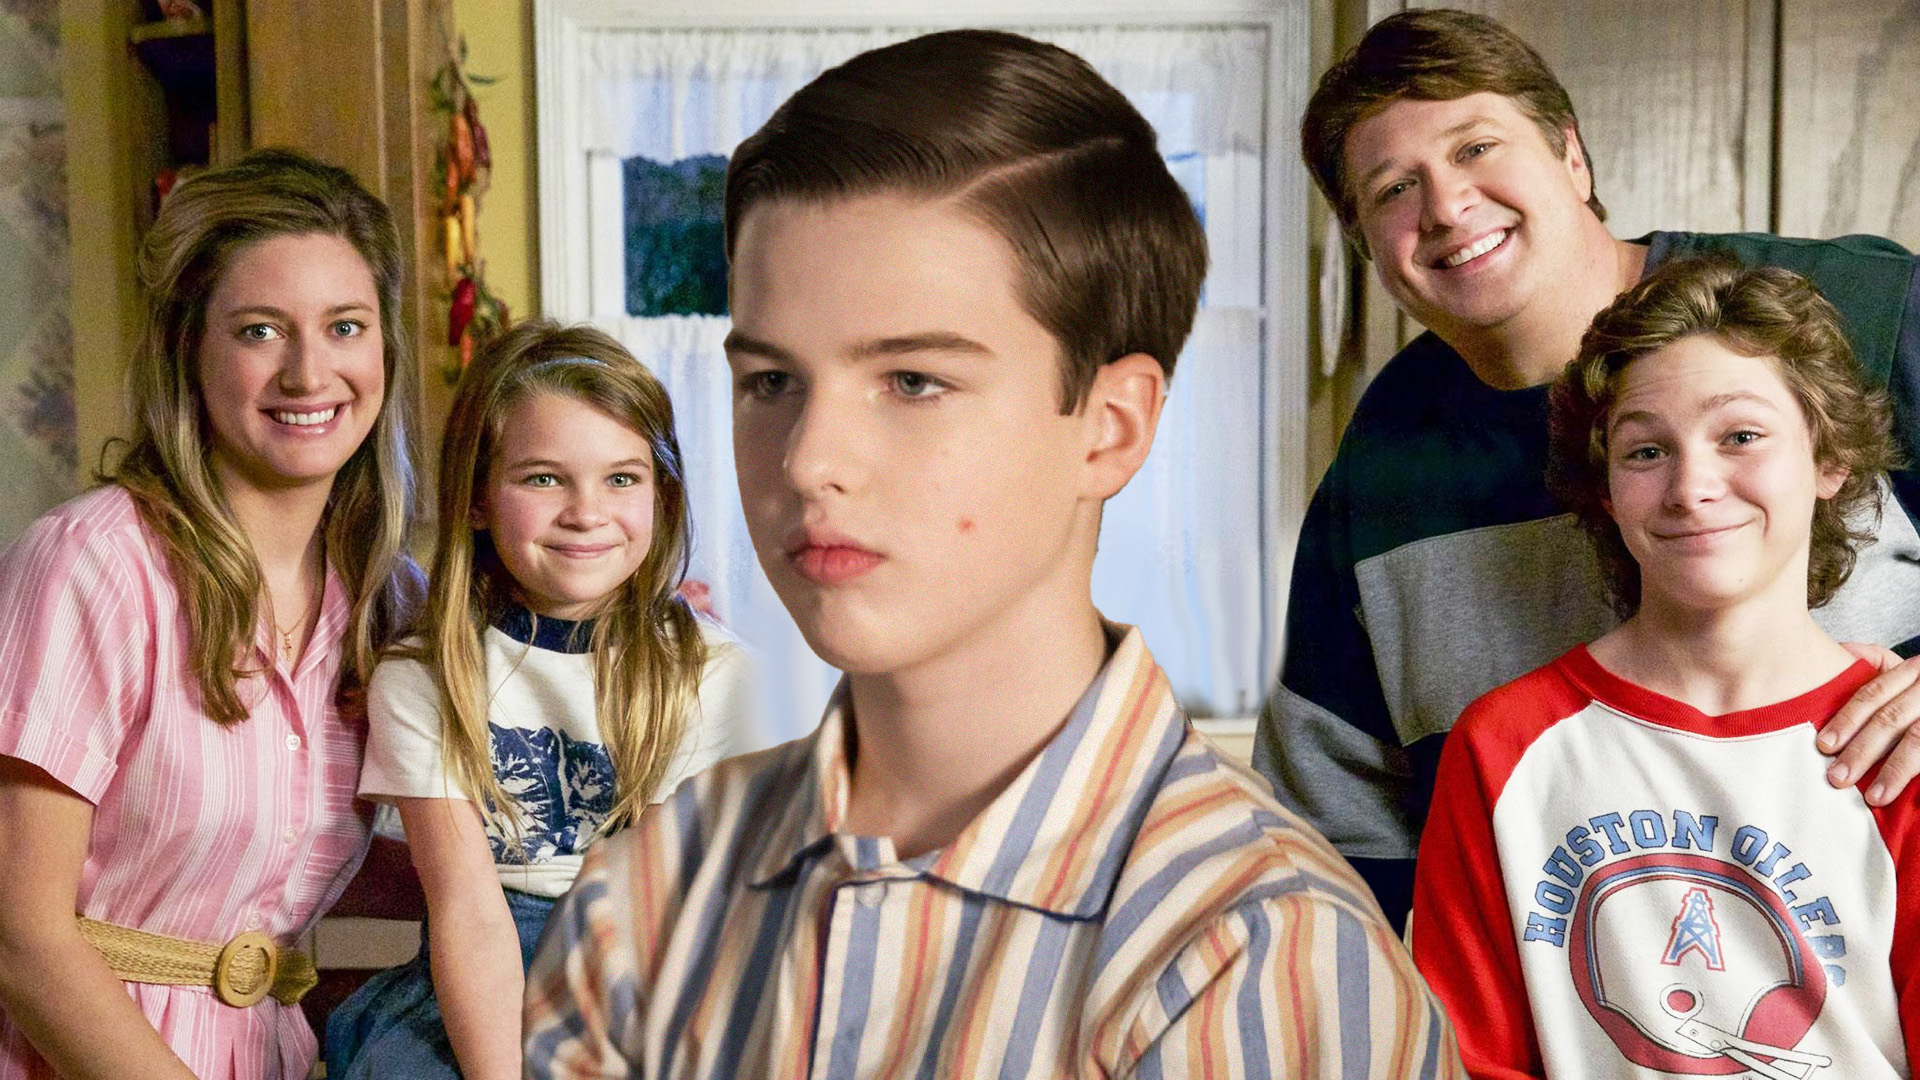 Meet Georgie & Mandy: The Spinoff Keeping the 'Young Sheldon' Spark Alive